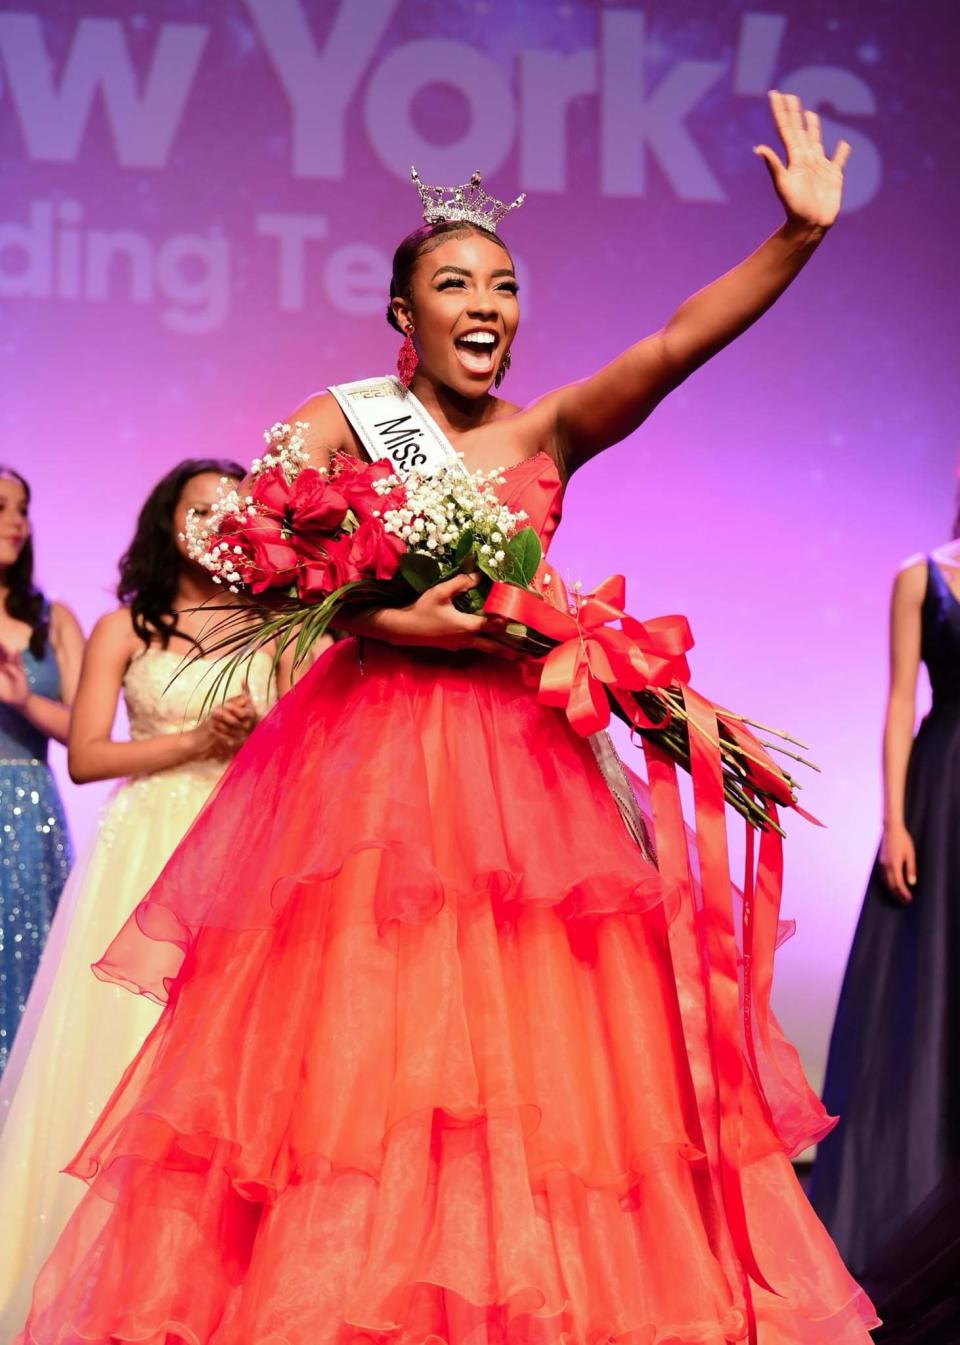 Dajania James, 17, of Rochester was crowned Miss New York's Outstanding Teen 2022 on May 29, 2022.